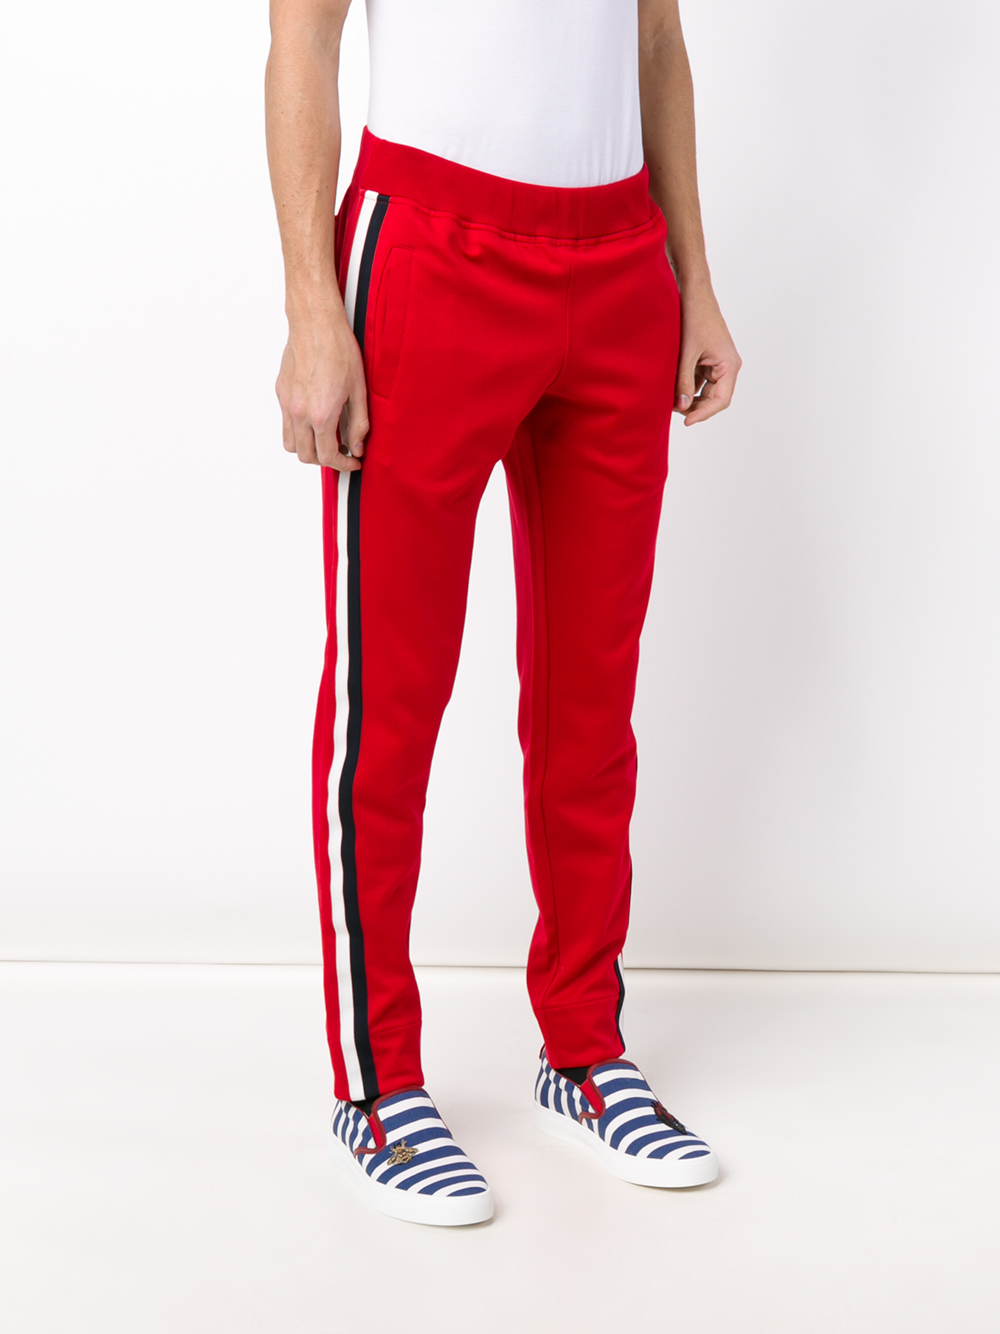 Lyst - Gucci Striped Panel Track Pants in Red for Men